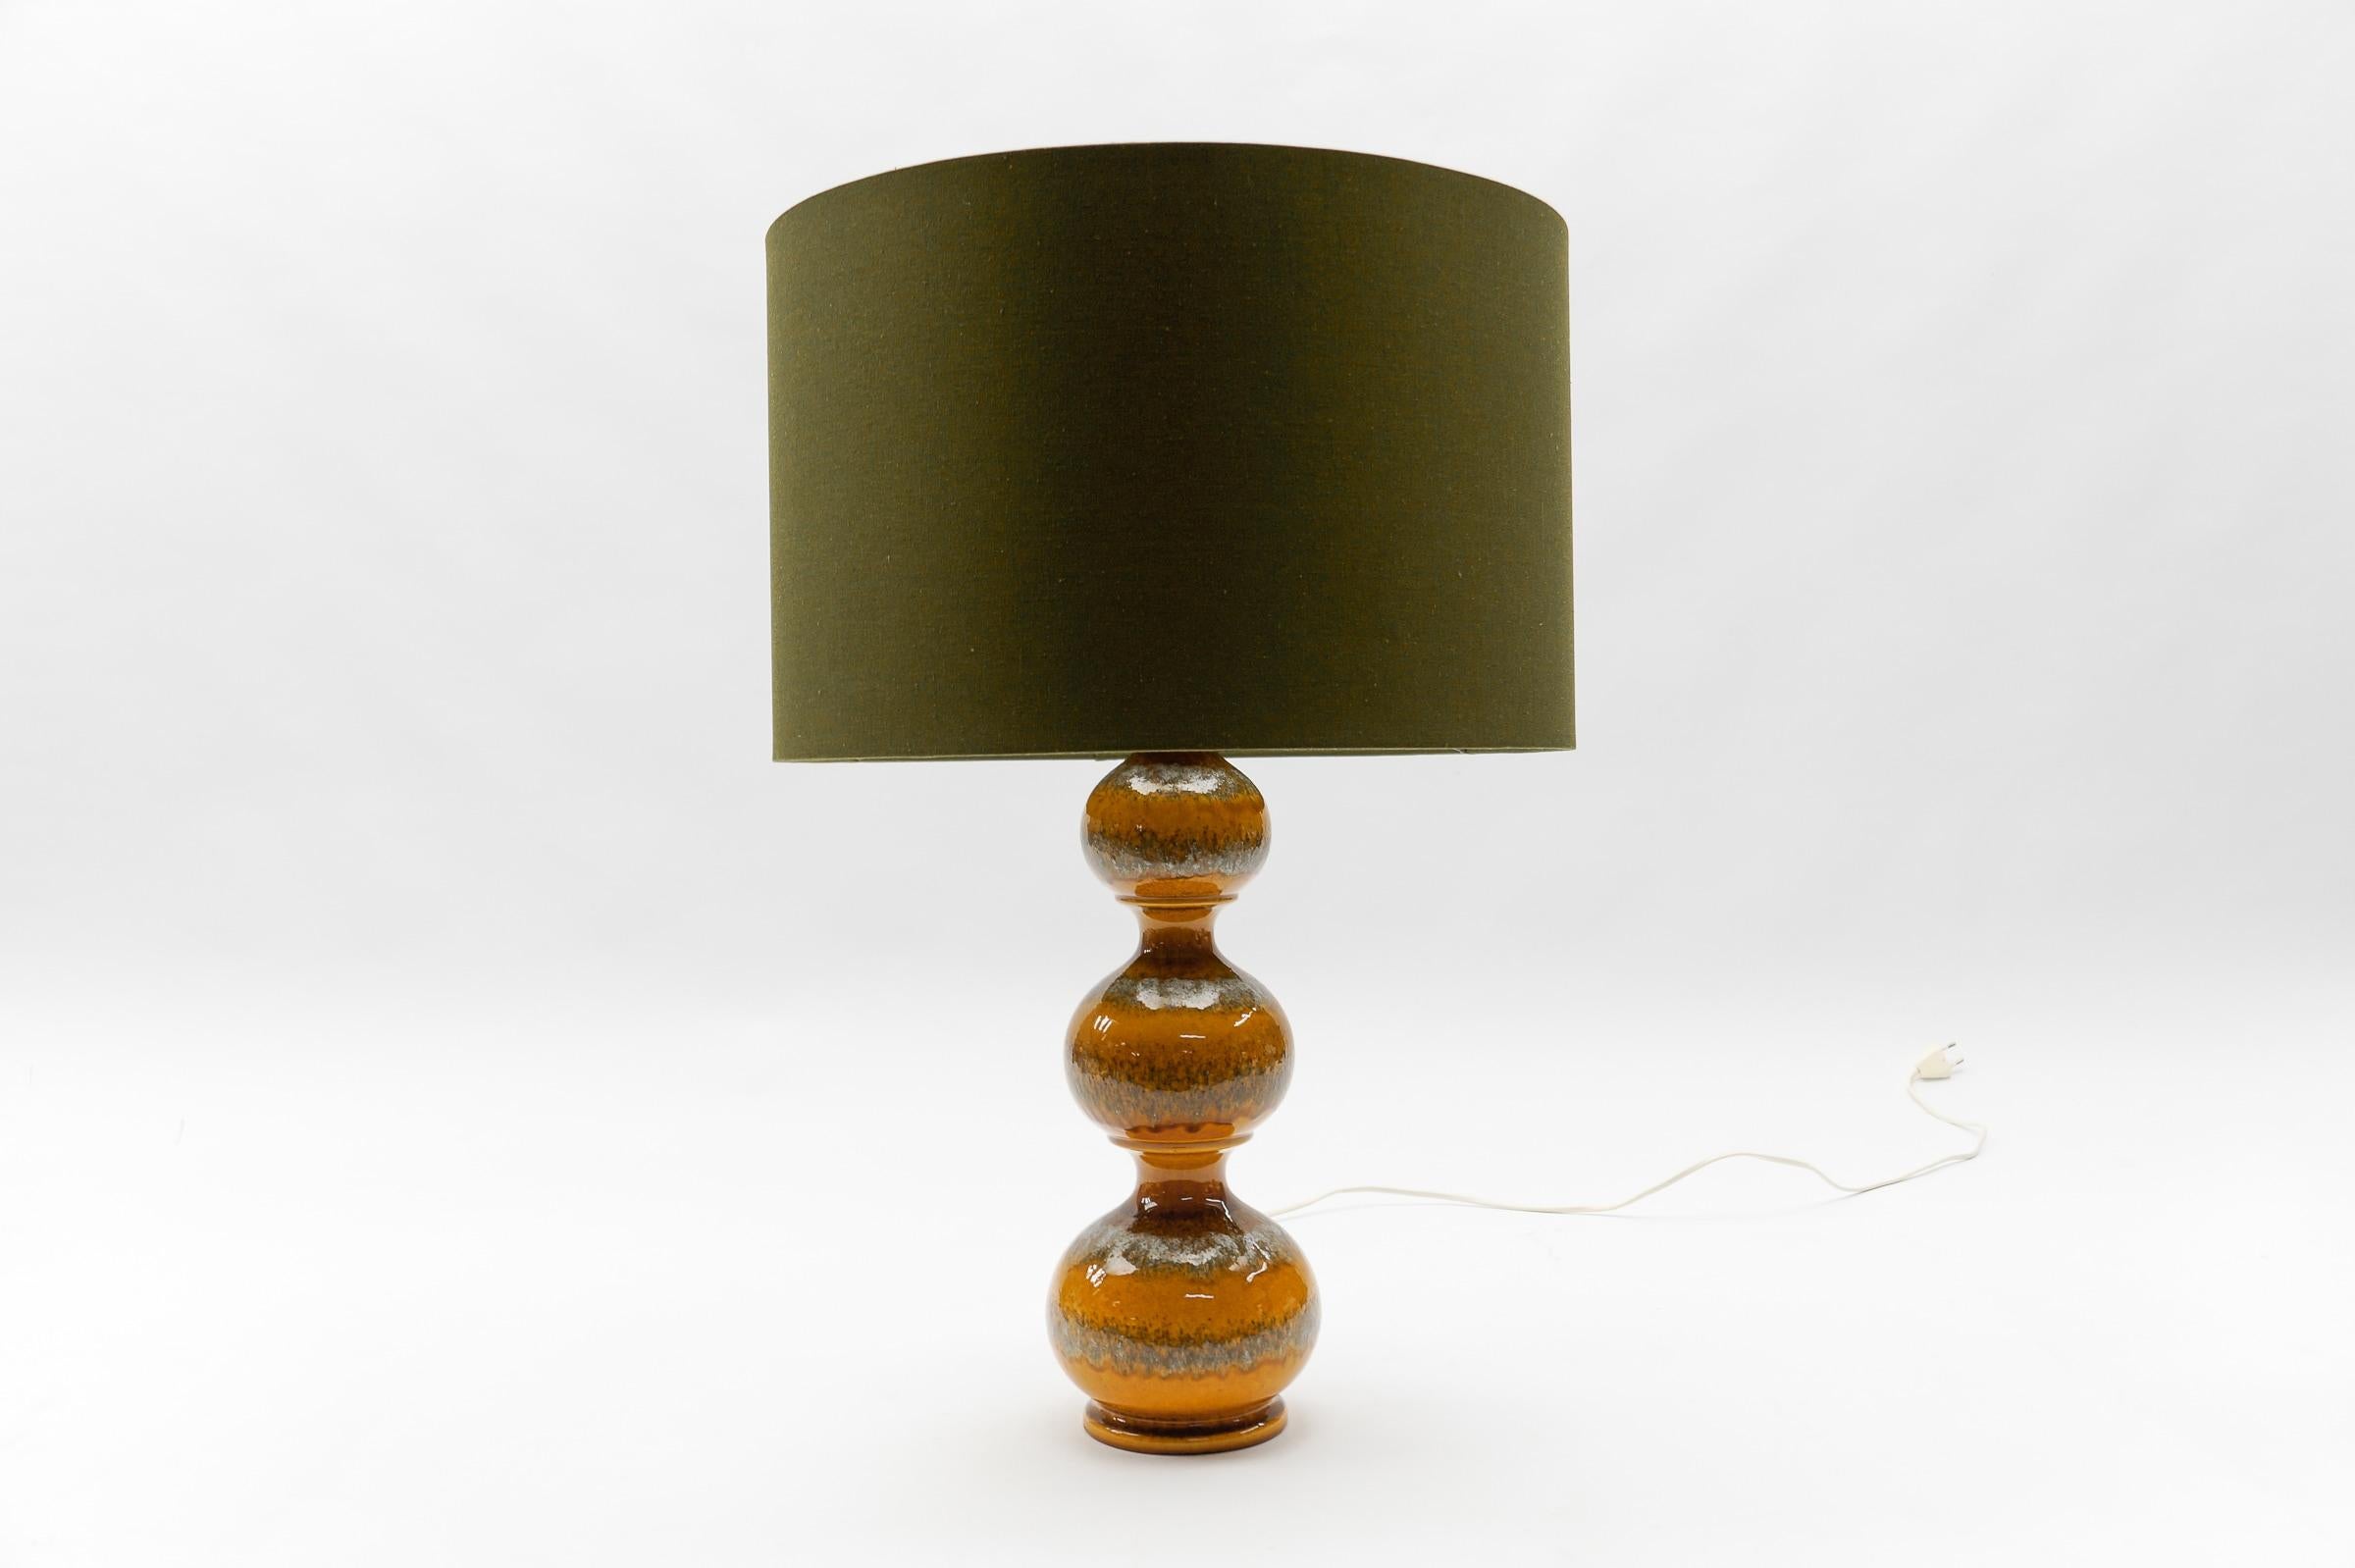 These ceramic table lamp was designed in the 1960s. 

We have a total of six table lamp bases from the Kaiser Leuchten Bubble ceramic series from the 1960s. 

Three large orange ones, one slightly smaller one and two larger green ones. 

The